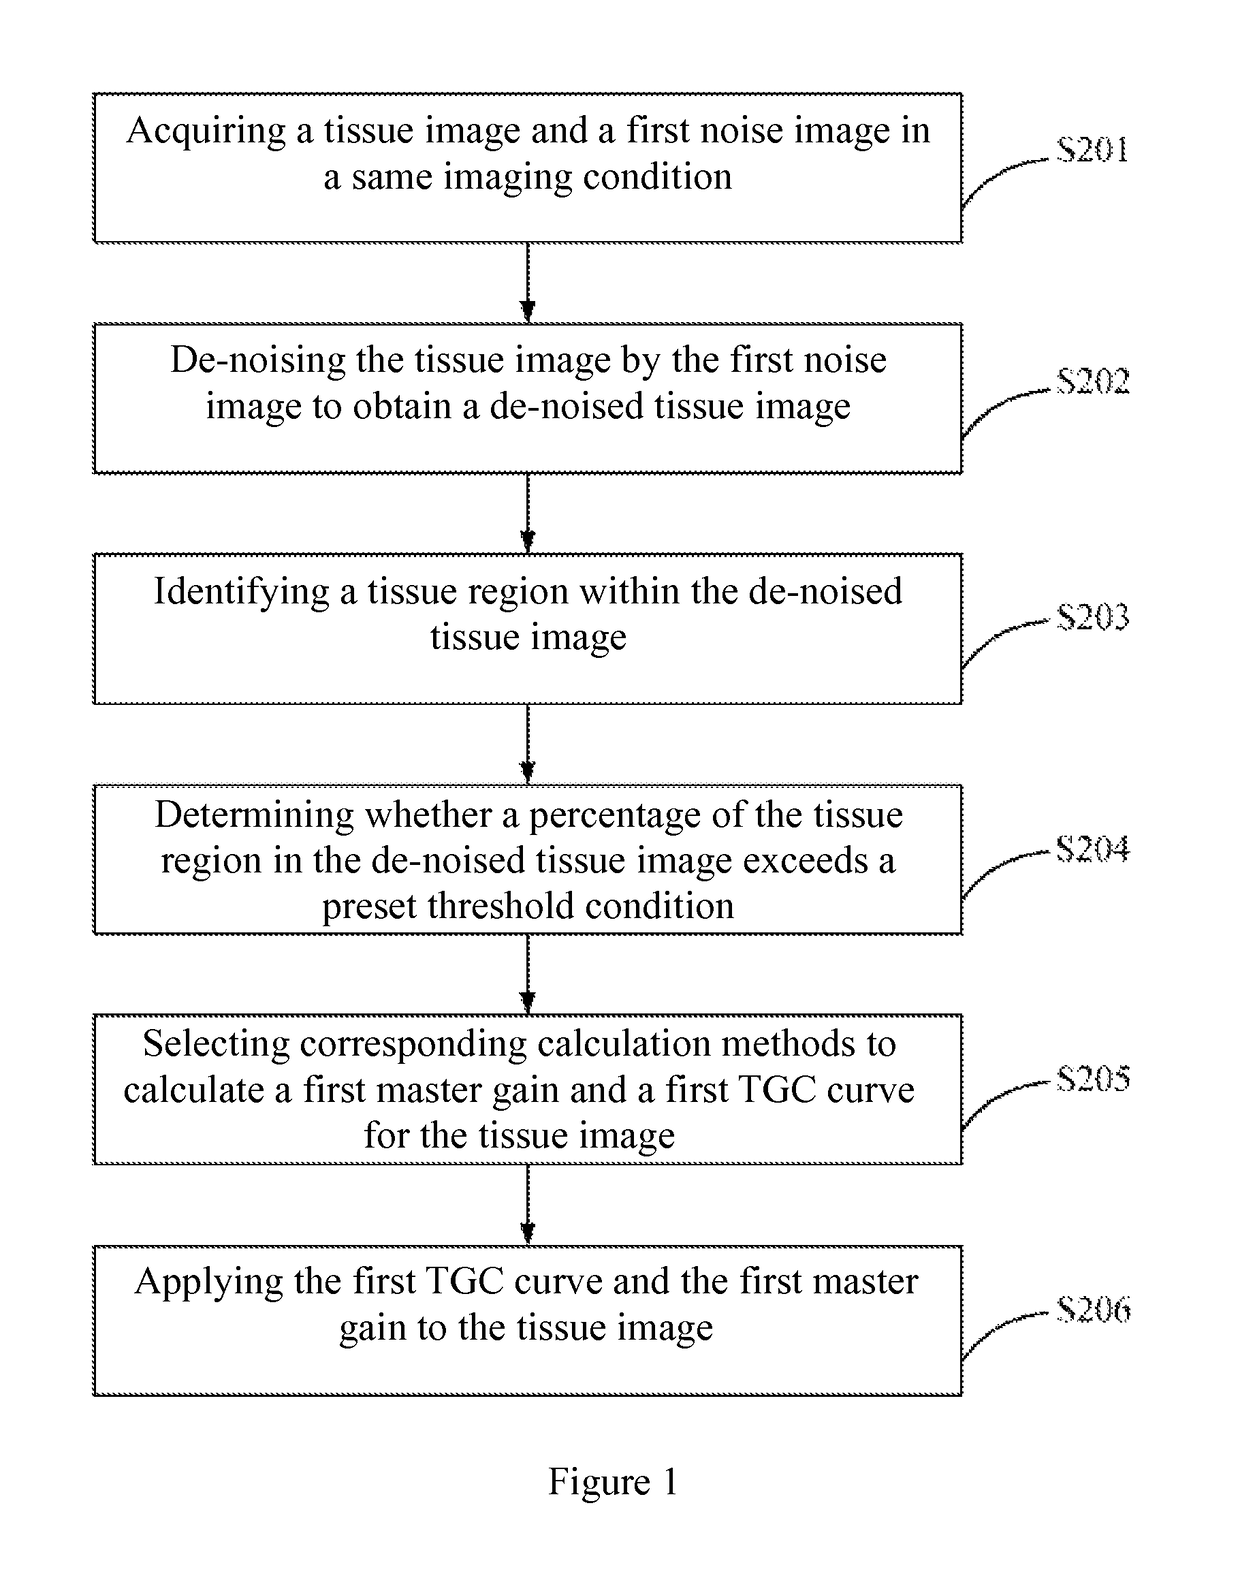 Methods for optimizing gain of ultrasound images and automatic gain optimization apparatuses for ultrasound imaging